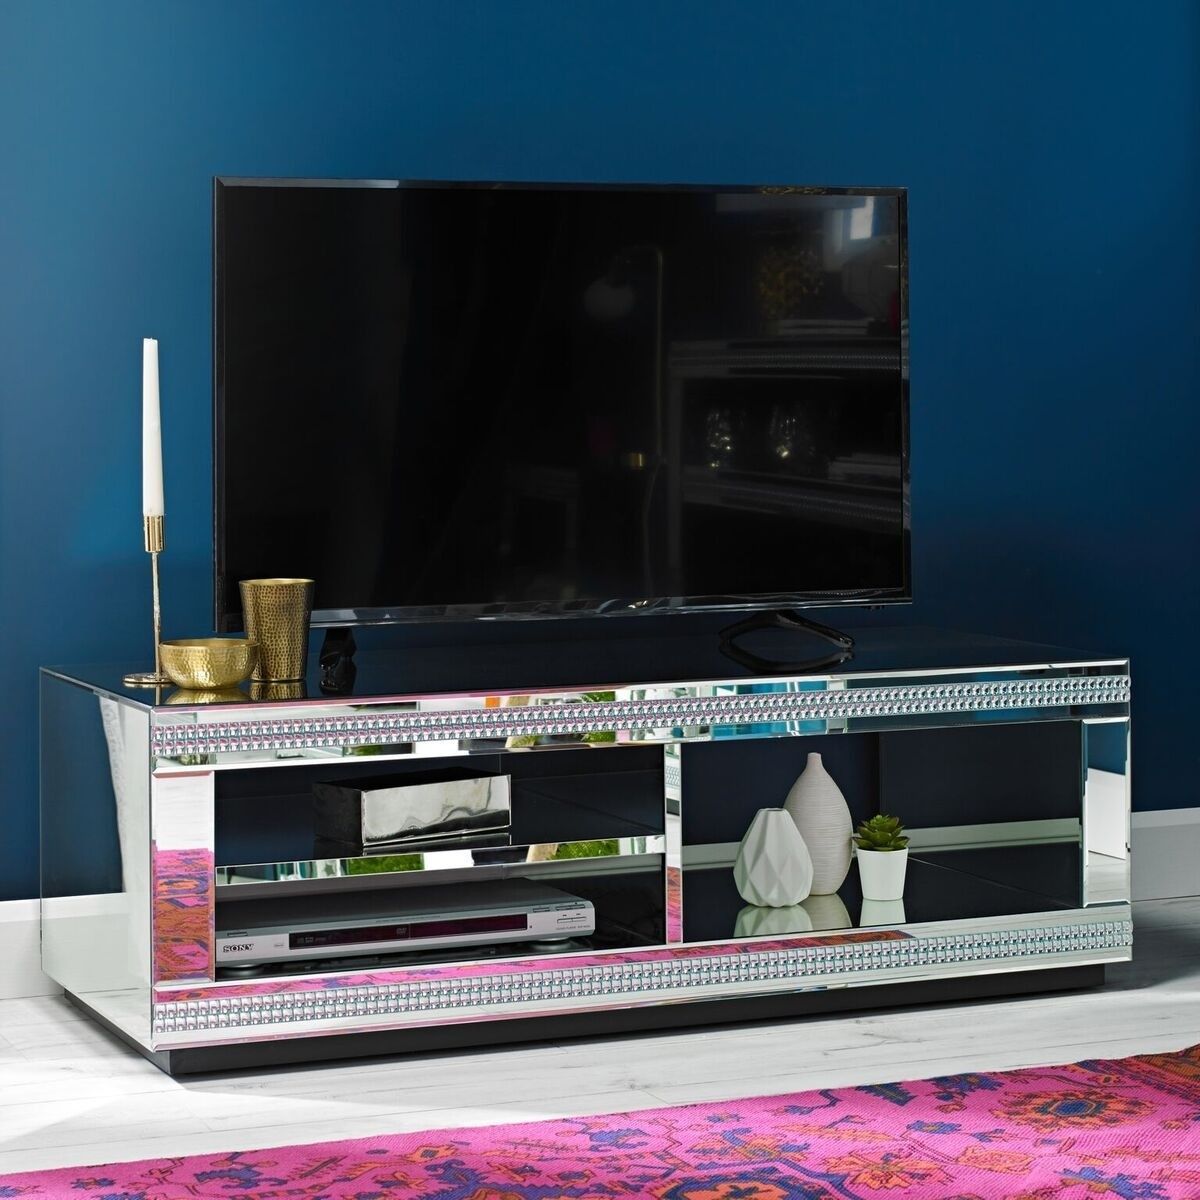 Lpd Biarritz Mirrored Tv Stand | Mirror Tv Unit, Mirror Tv Inside Mirrored Tv Cabinets (View 14 of 15)